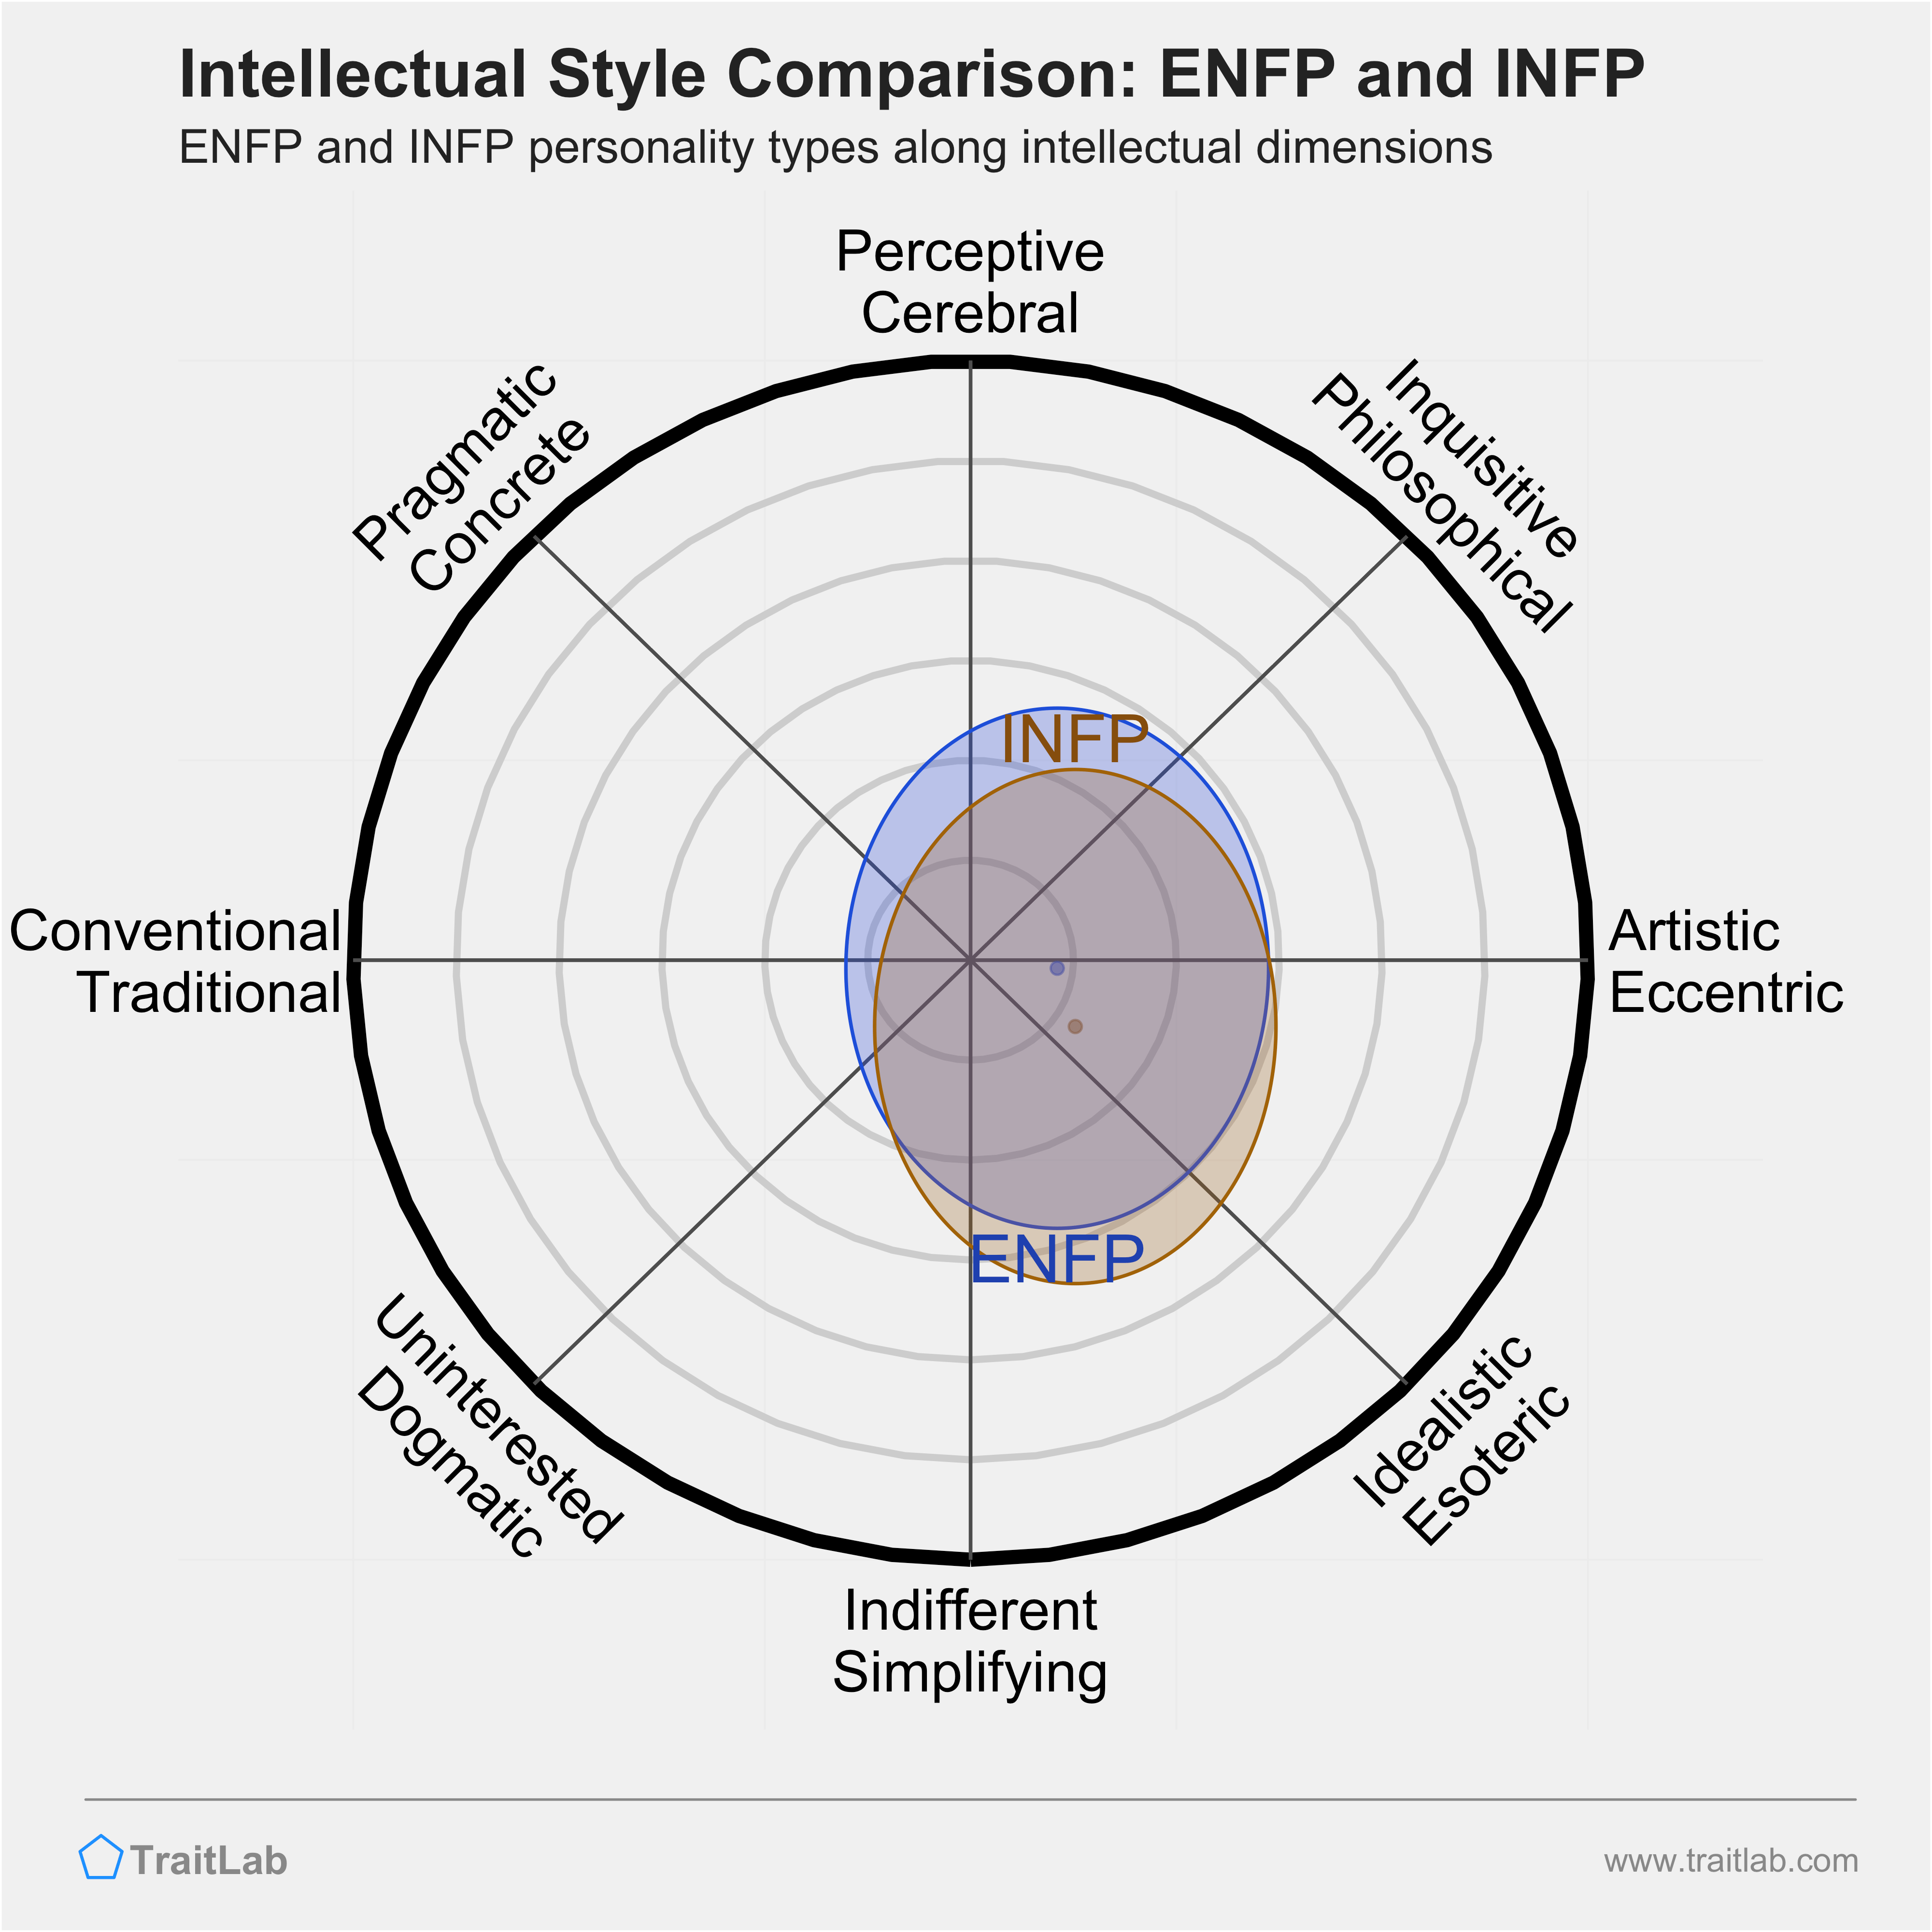 ENFP and INFP comparison across intellectual dimensions